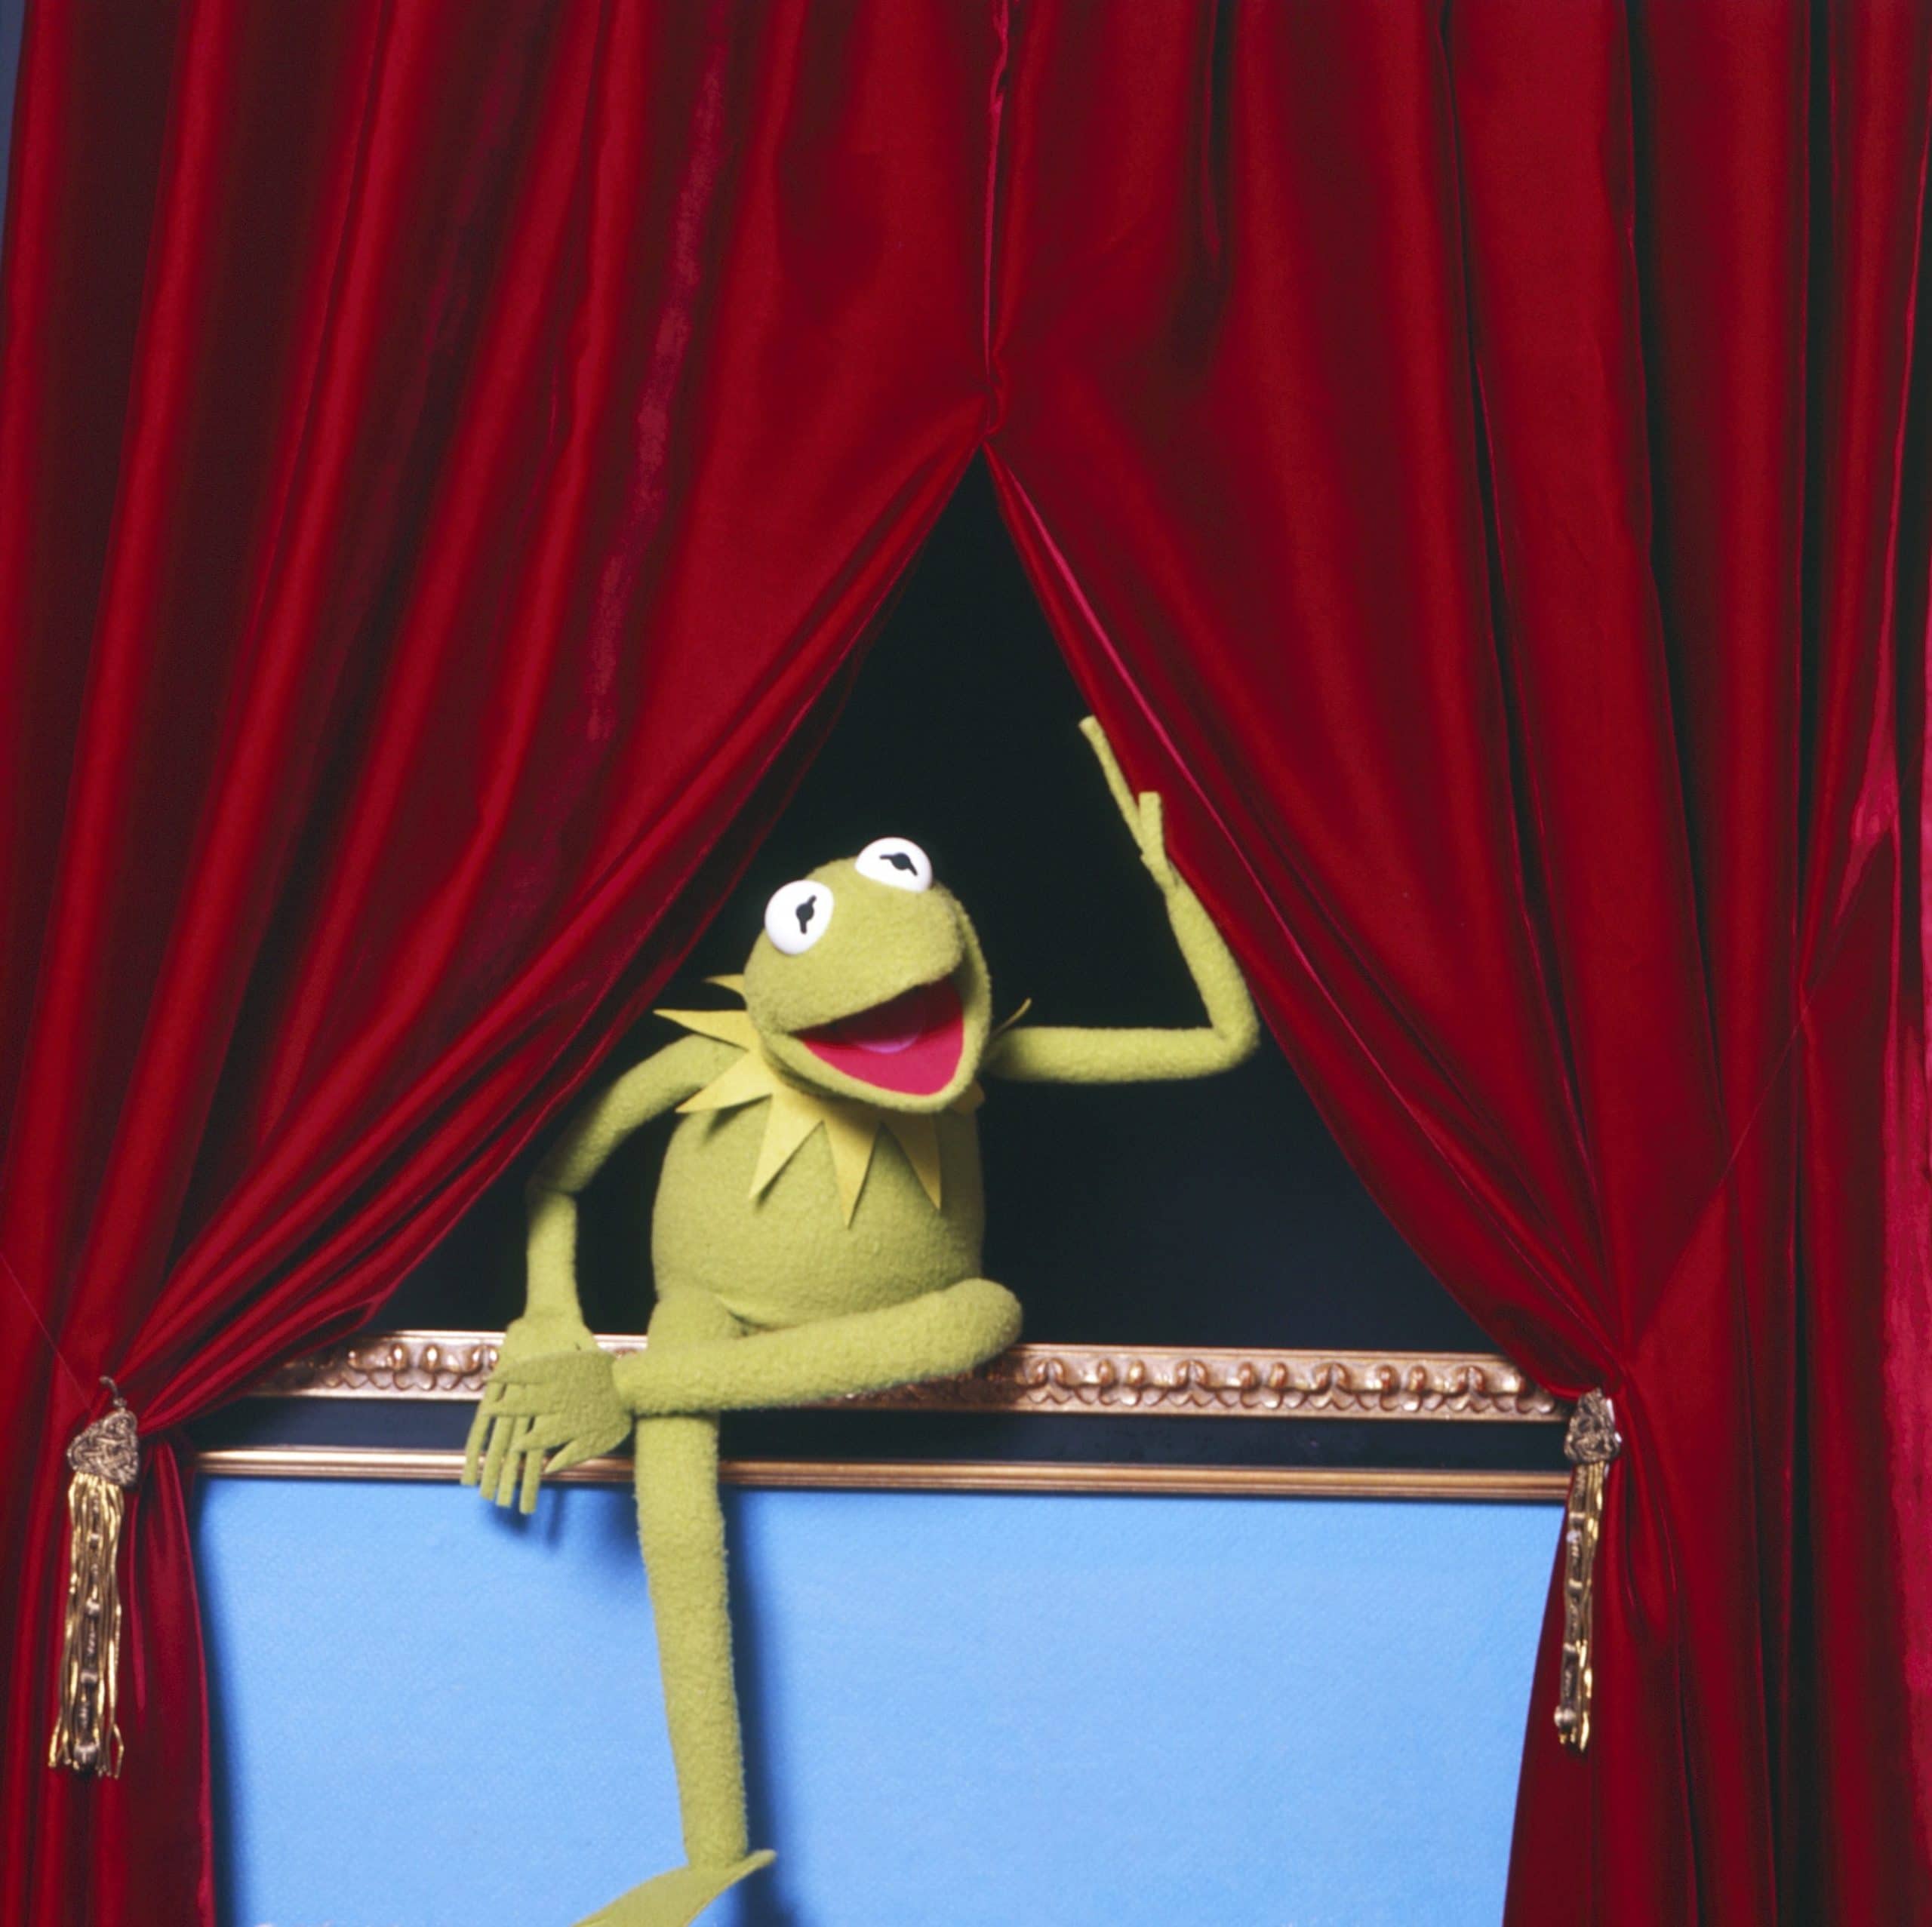 Disney+ Includes Disclaimer That Old Episodes Of ‘The Muppet Show’ Has Offensive Content